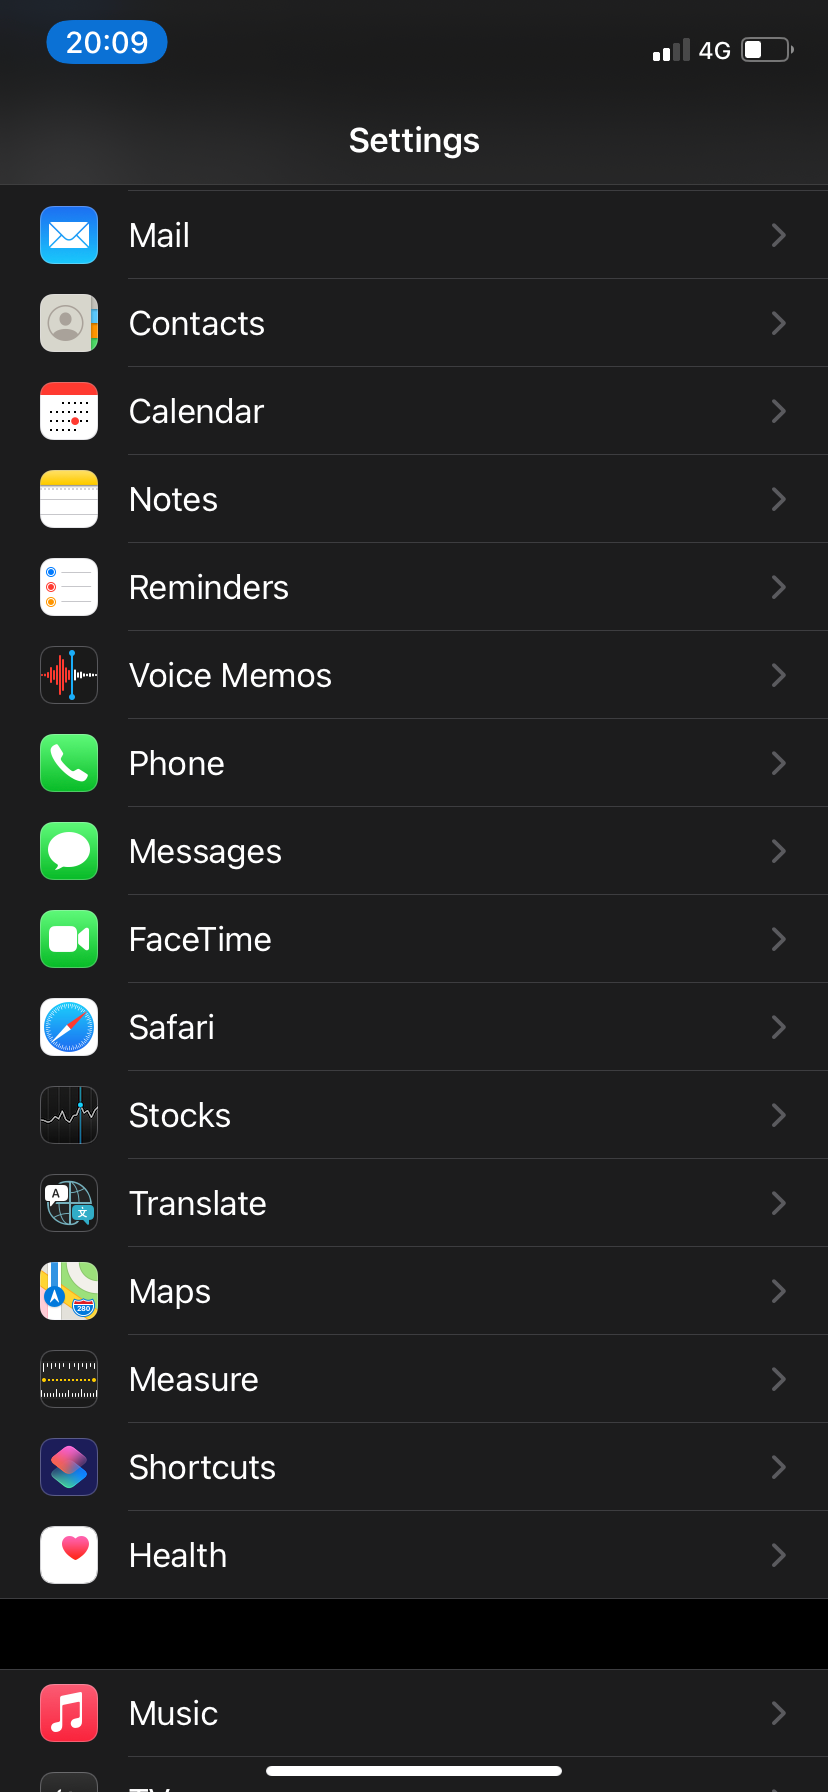 List of apps in iPhone Settings.